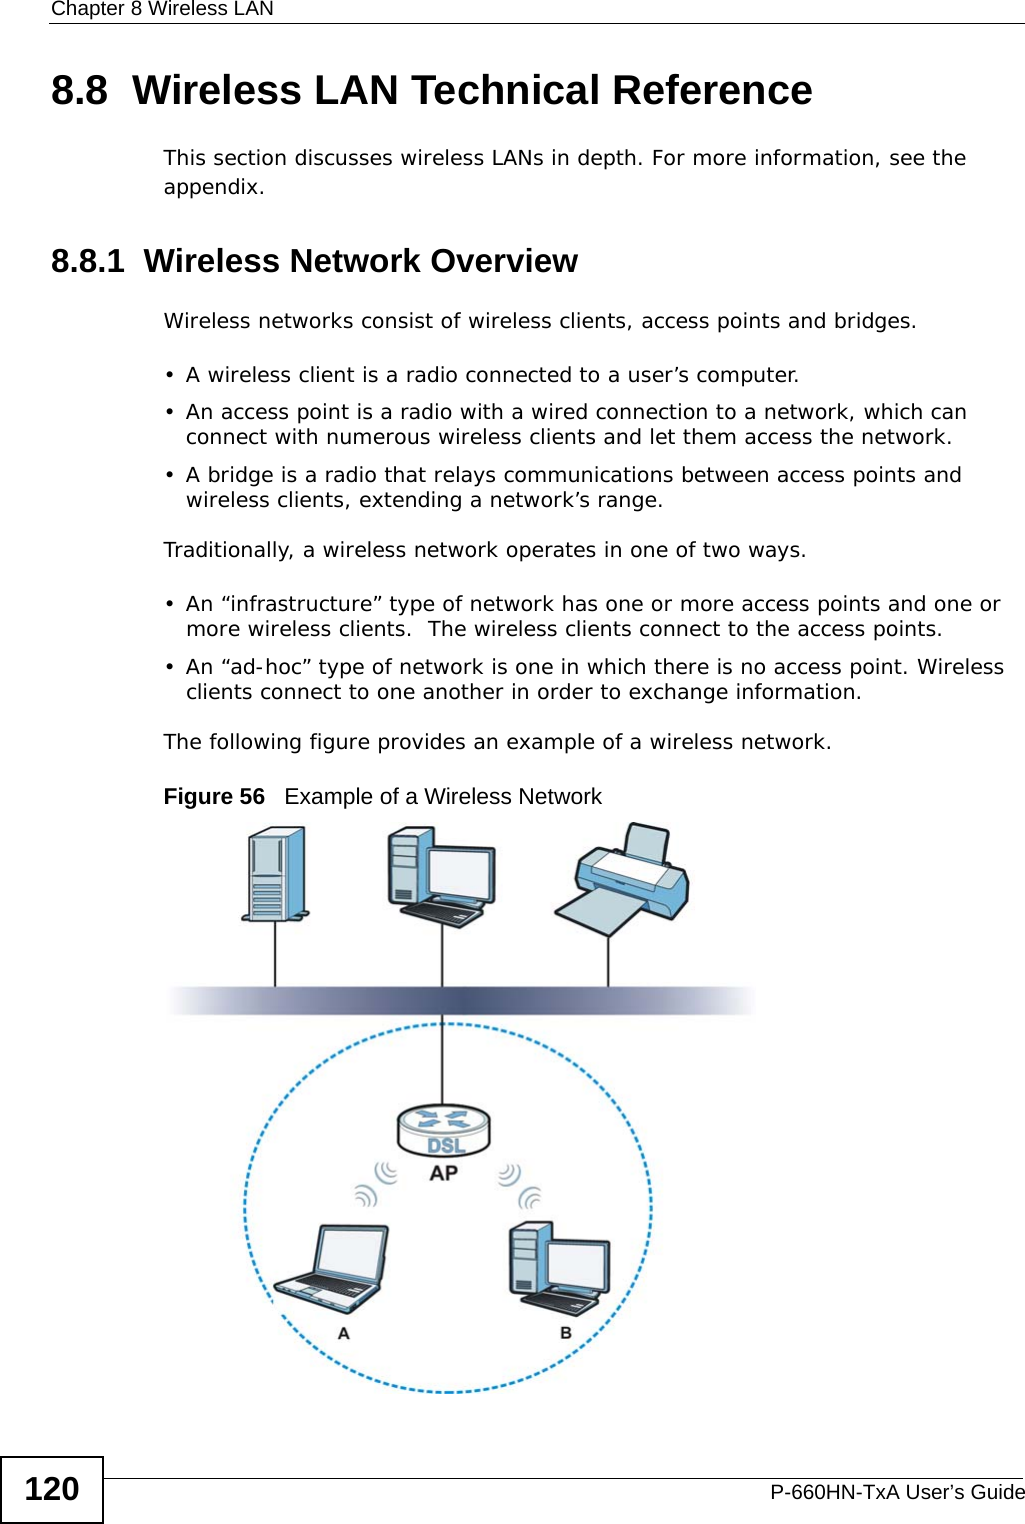 Chapter 8 Wireless LANP-660HN-TxA User’s Guide1208.8  Wireless LAN Technical ReferenceThis section discusses wireless LANs in depth. For more information, see the appendix.8.8.1  Wireless Network OverviewWireless networks consist of wireless clients, access points and bridges. • A wireless client is a radio connected to a user’s computer. • An access point is a radio with a wired connection to a network, which can connect with numerous wireless clients and let them access the network. • A bridge is a radio that relays communications between access points and wireless clients, extending a network’s range. Traditionally, a wireless network operates in one of two ways.• An “infrastructure” type of network has one or more access points and one or more wireless clients.  The wireless clients connect to the access points.• An “ad-hoc” type of network is one in which there is no access point. Wireless clients connect to one another in order to exchange information.The following figure provides an example of a wireless network.Figure 56   Example of a Wireless Network